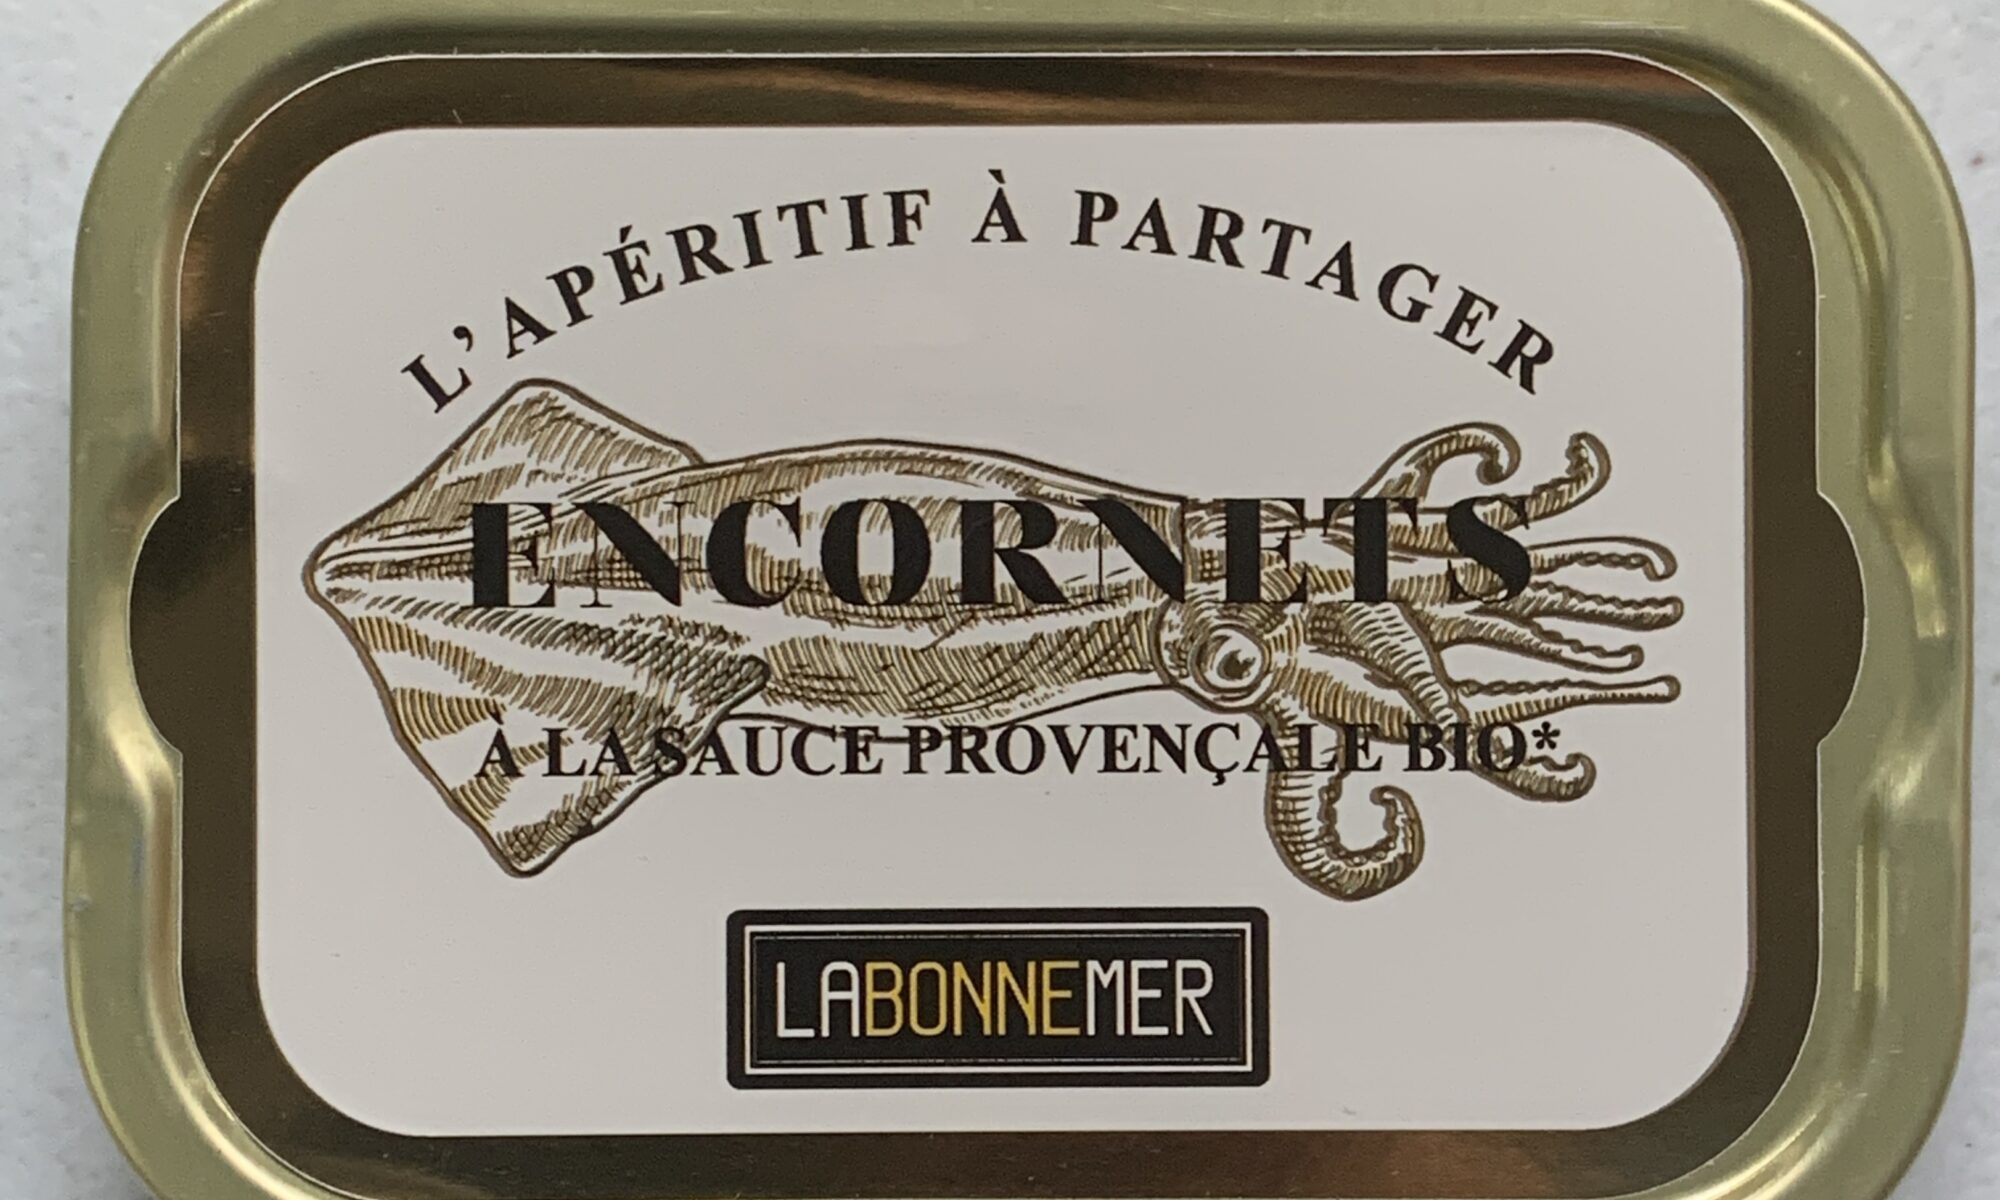 Image of the front of a tin of Ferrigno La Bonne Mer Squid in Organic Provencal Sauce